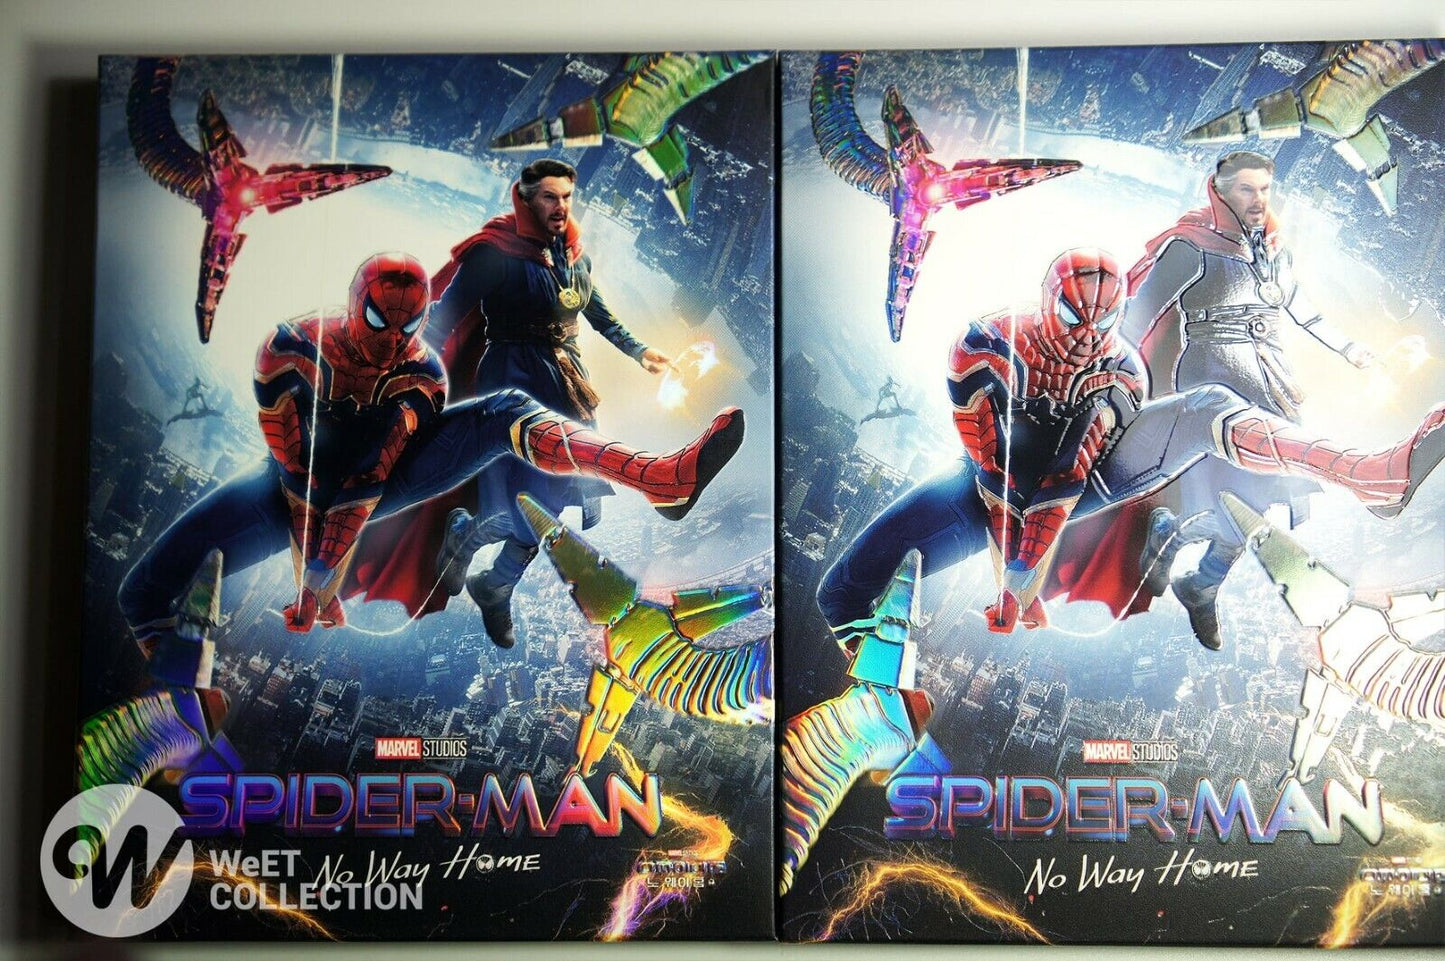 Spider-Man: No Way Home 4K Blu-ray Steelbook WeET Collection Collection #24 Full Slip A2